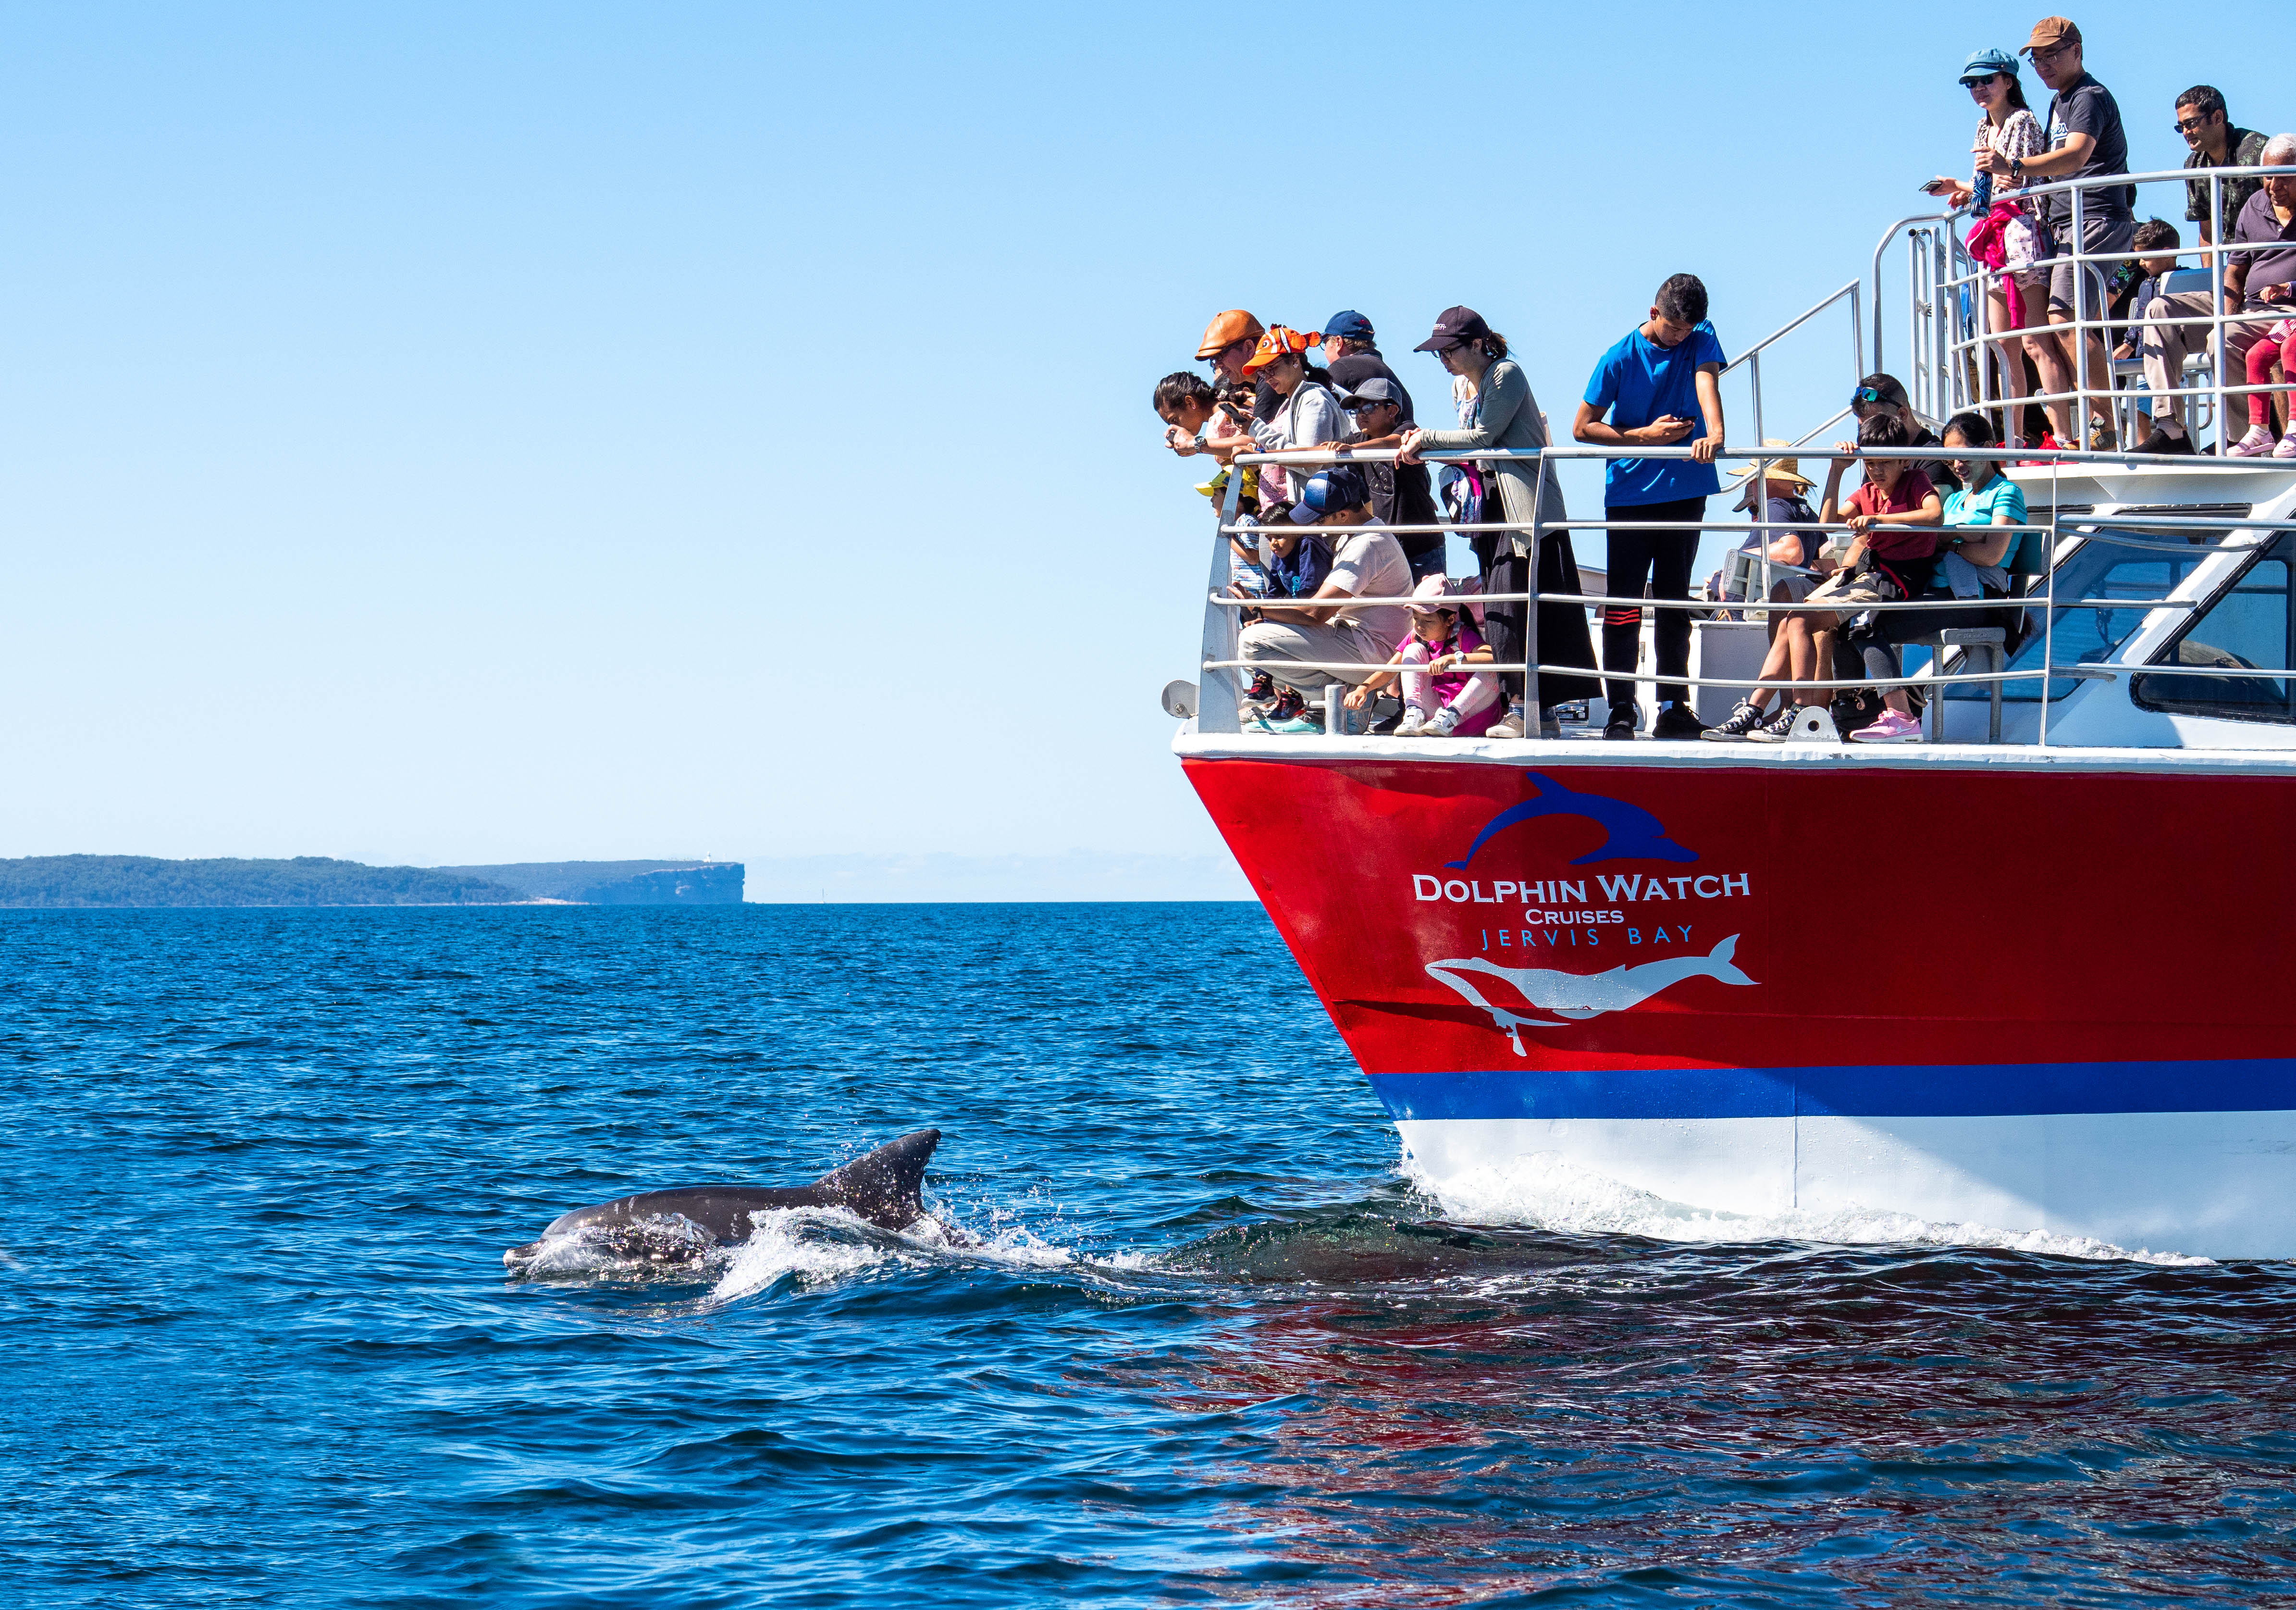 Dolphin watching cruise in Jervis Bay